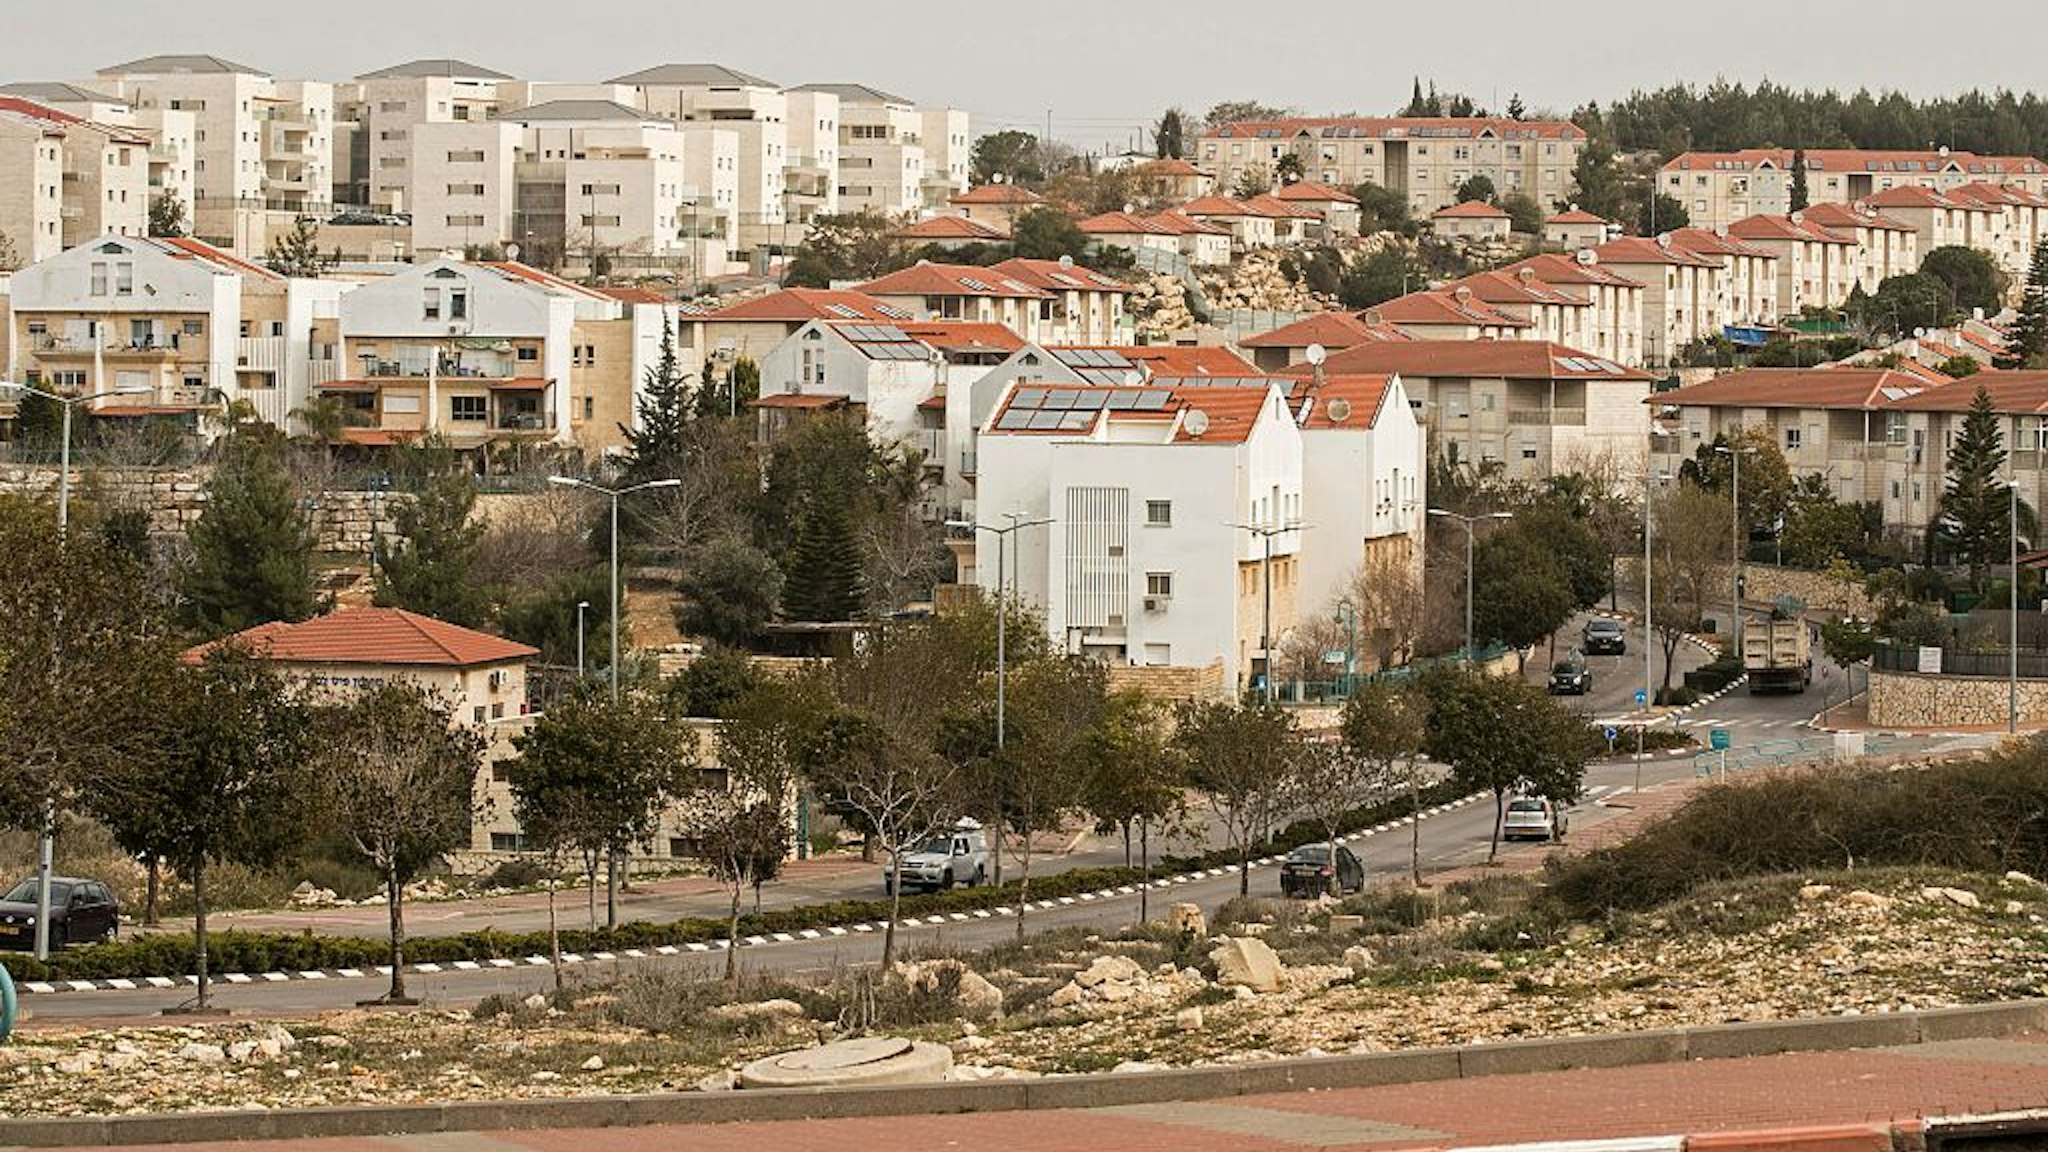 This photo taken on January 25, 2017 shows a partial view of the Israeli settlement of Ariel near the West Bank city of Nablus on January 25, 2017. Israel has approved the construction of 2,500 settler homes in the occupied West Bank, officials said on January 24, 2017, making good on promises to expand such building following the election of US President Donald Trump.